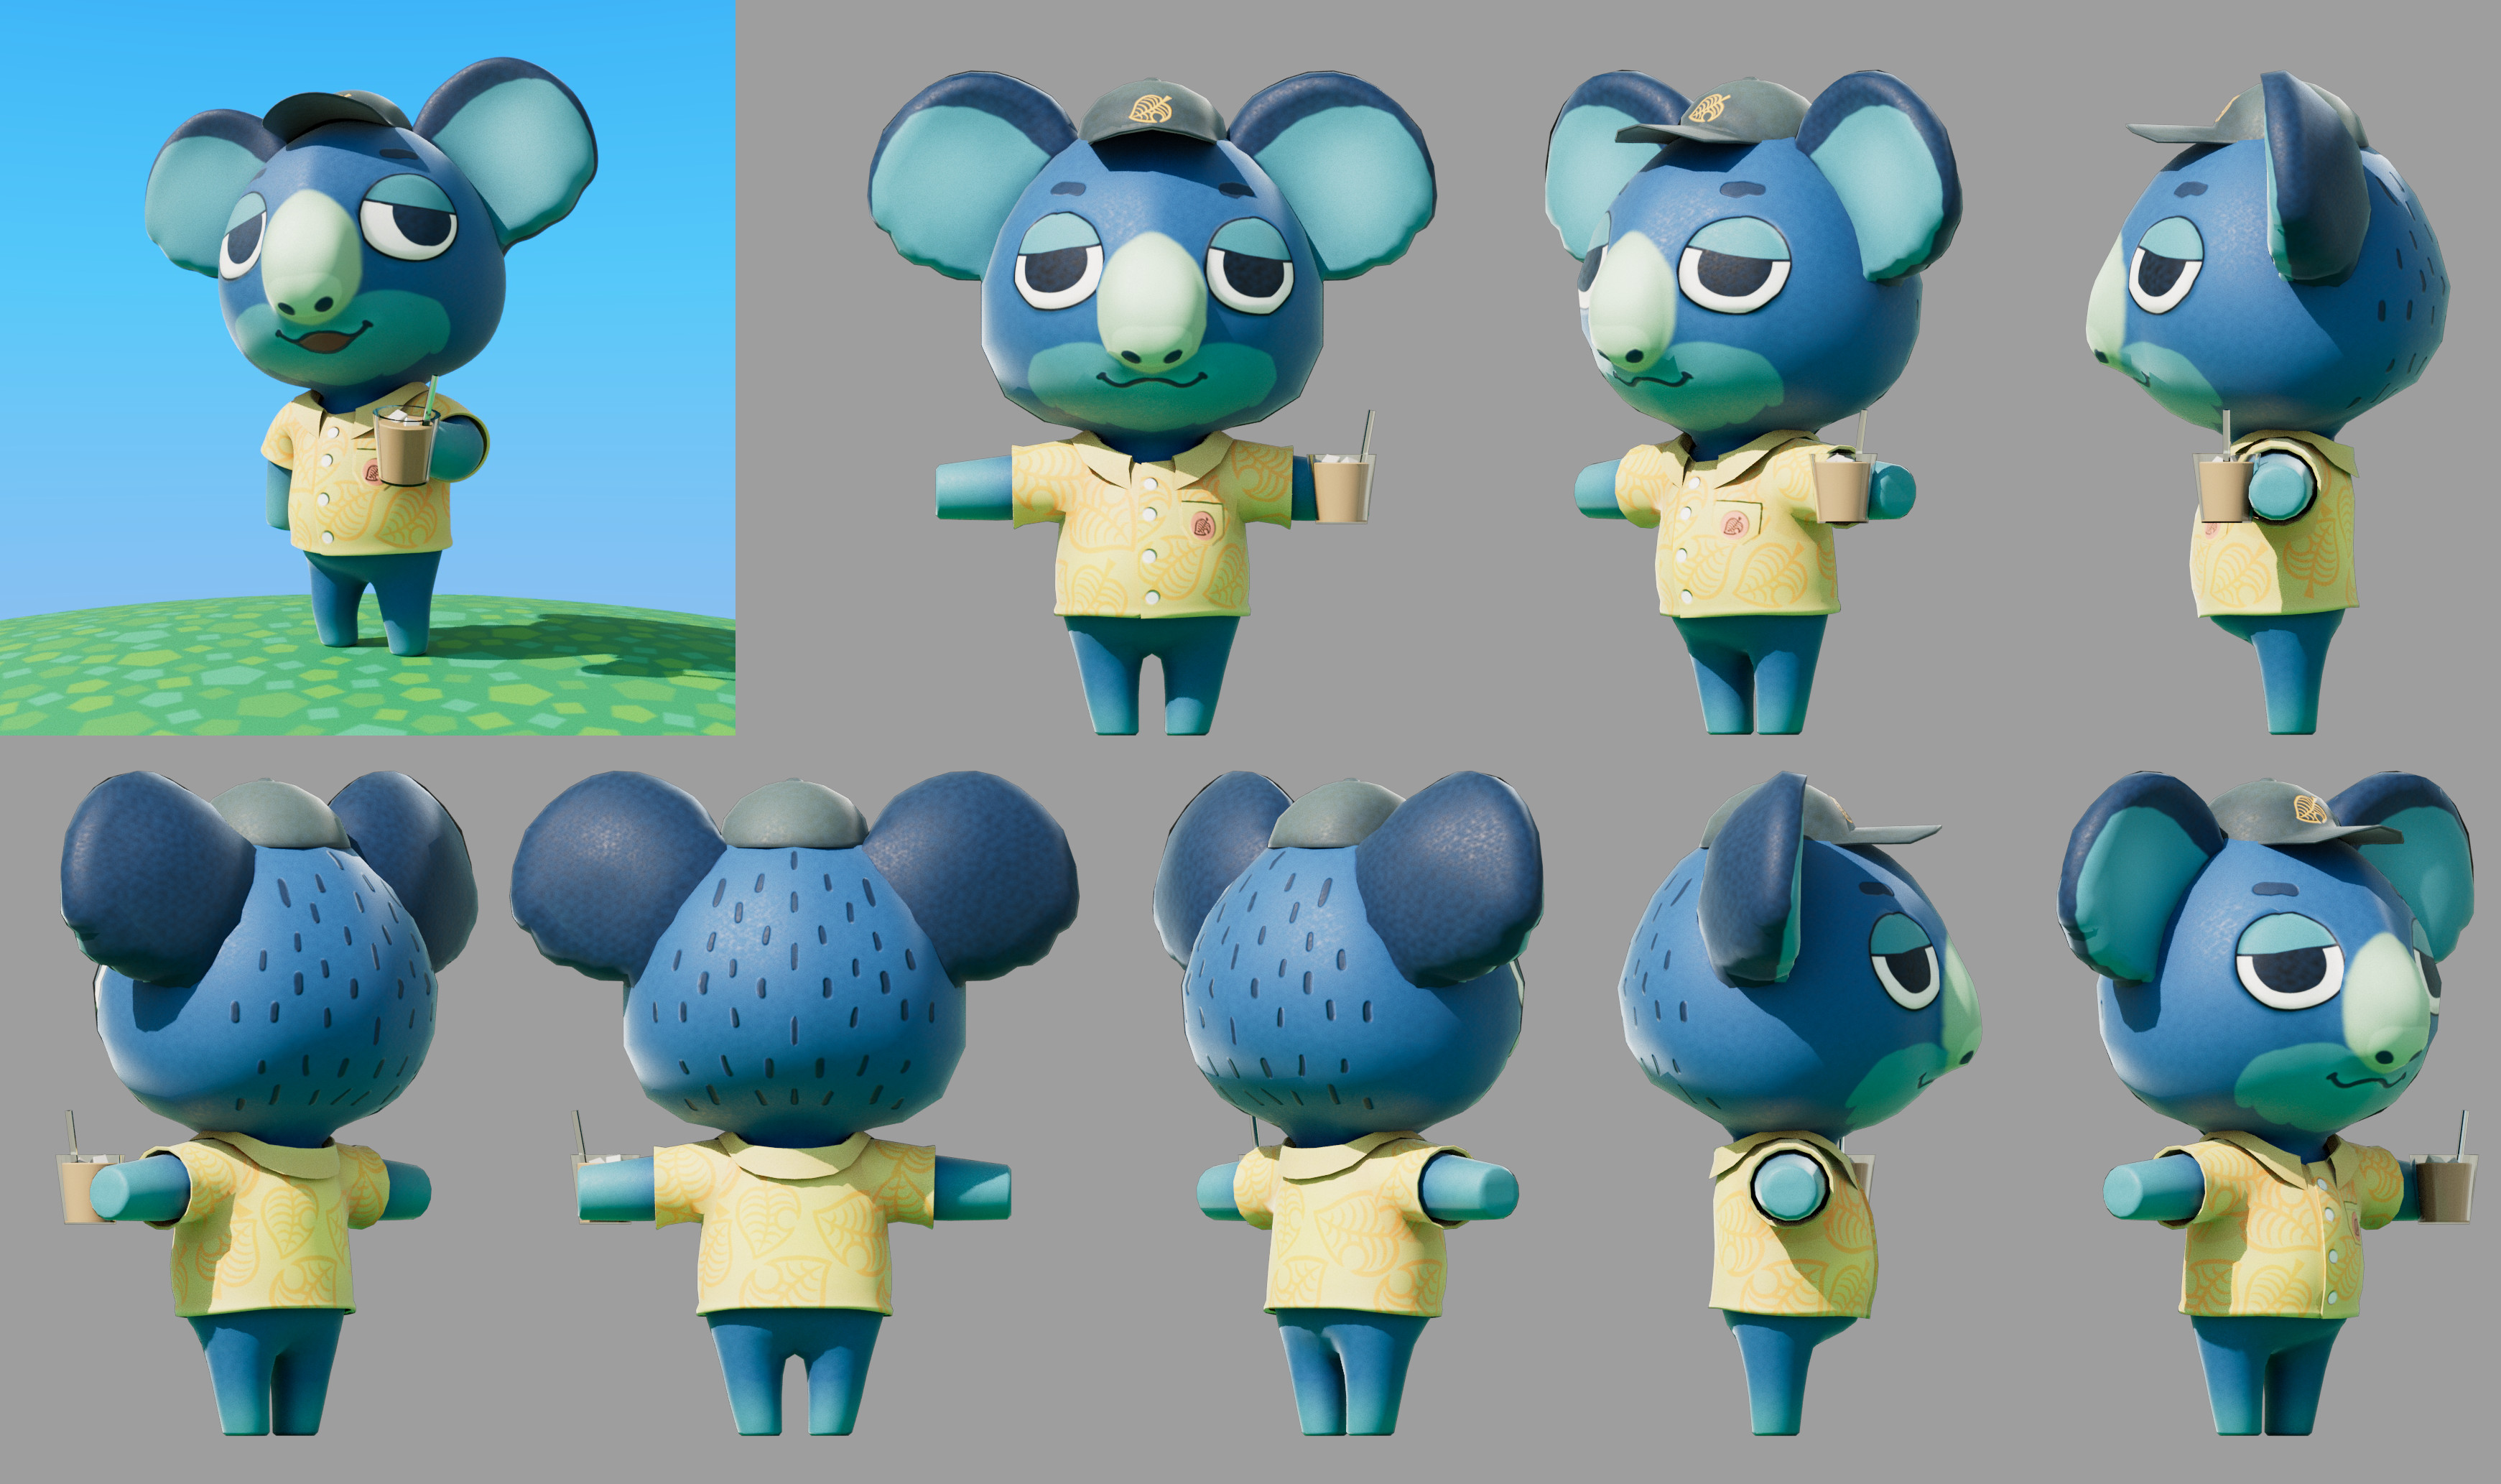 Turnaround images showing the character from multiple angles